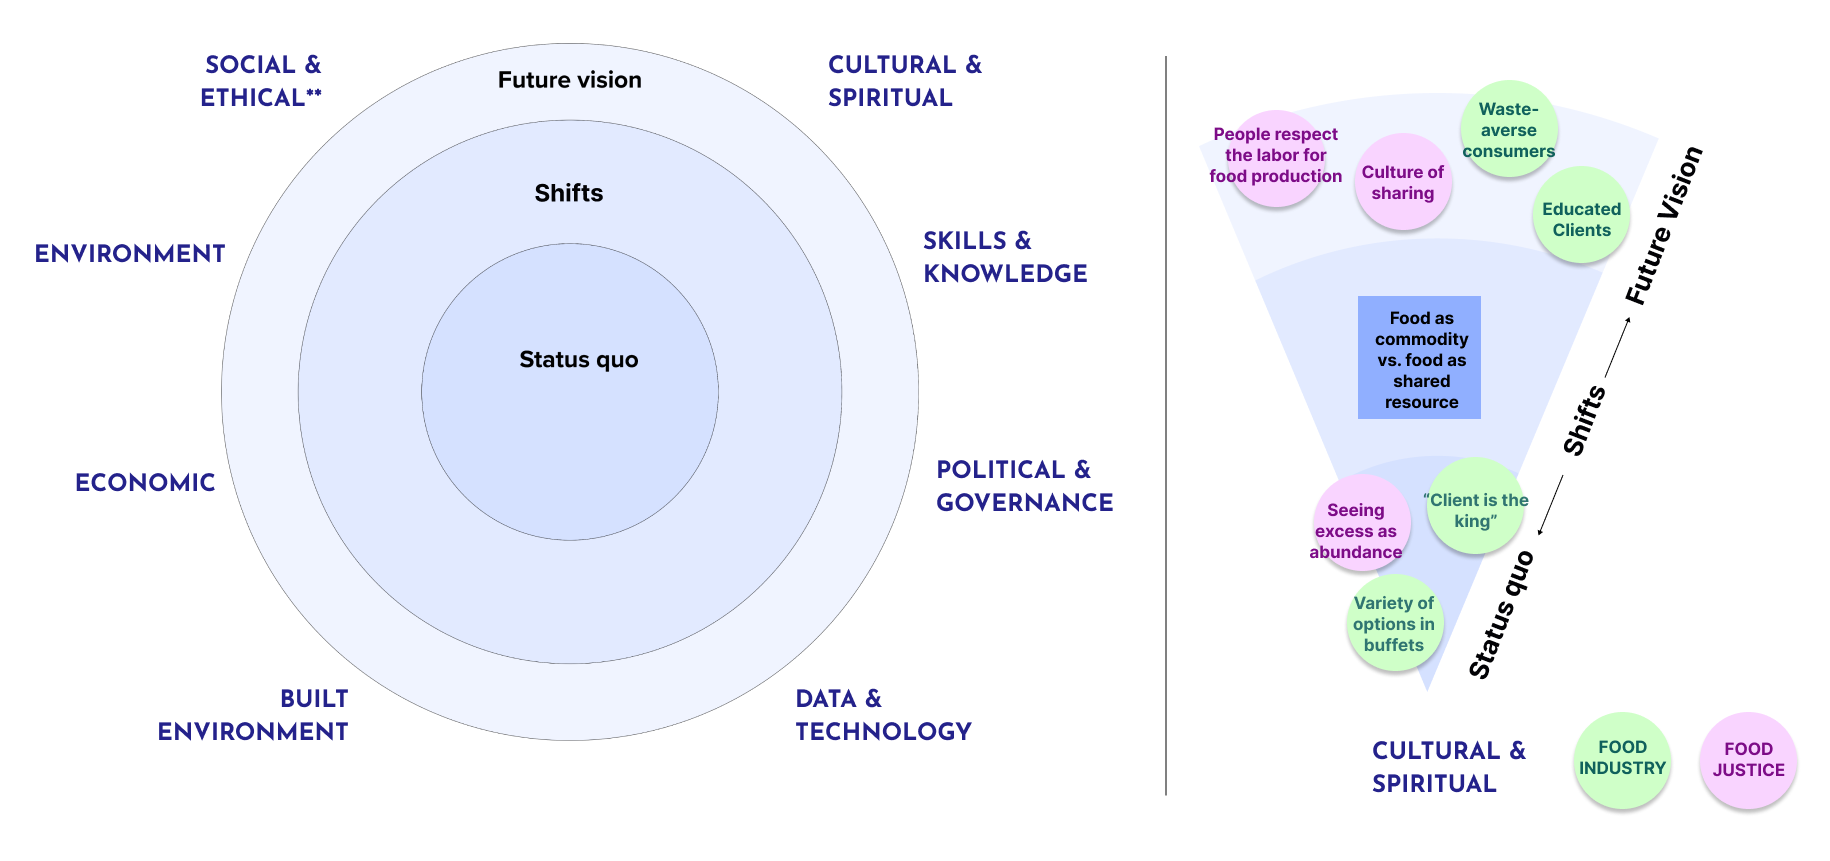 Left image shows a template diagram, with three concentric circles, labeled status quo, shifts and future vision, from center to edge. Around the circle, 8 dimensions of transitions are listed: cultural & spiritual, skills and knowledge, political and governance, data and technology, built environment, economic, environment, social and ethical. Right image shows example use for the cultural and spiritual dimension of transition as seen from food industry and food justice perspectives, depicted in color-coded circles. 